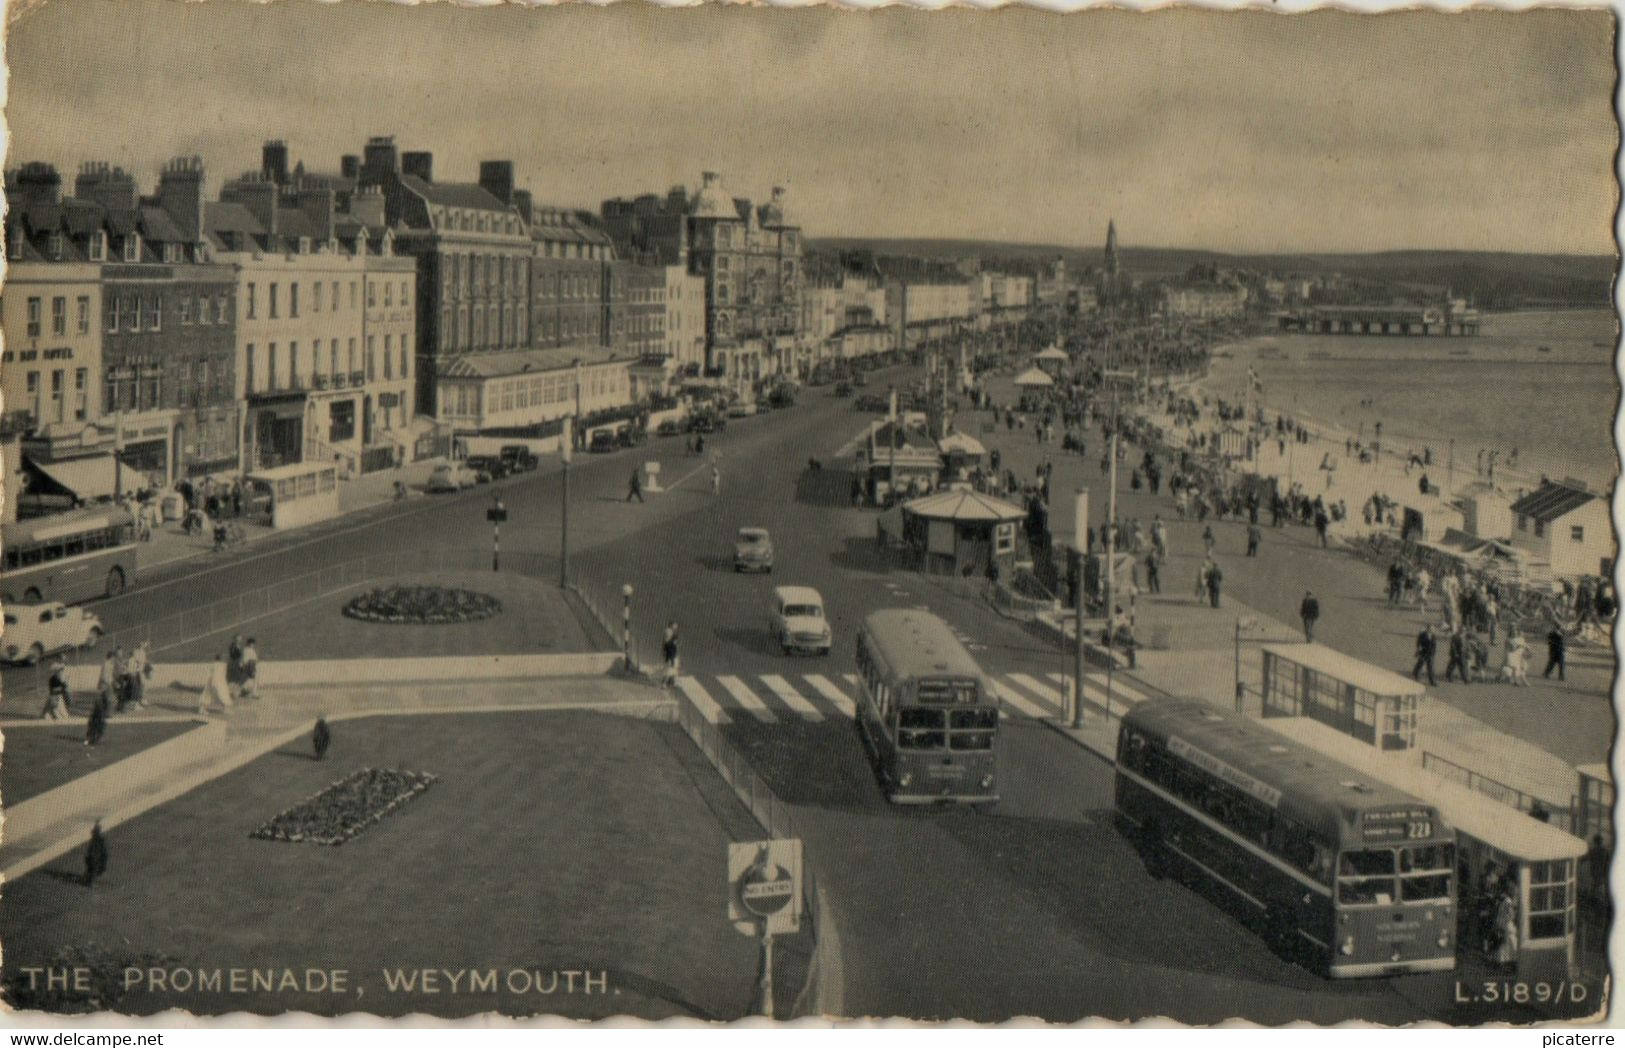 THE PROMENADE , WEYMOUTH - C1960s - "Silveresque" 3059V-Valentine L.3189/D  (Buses & Old Cars) - Weymouth